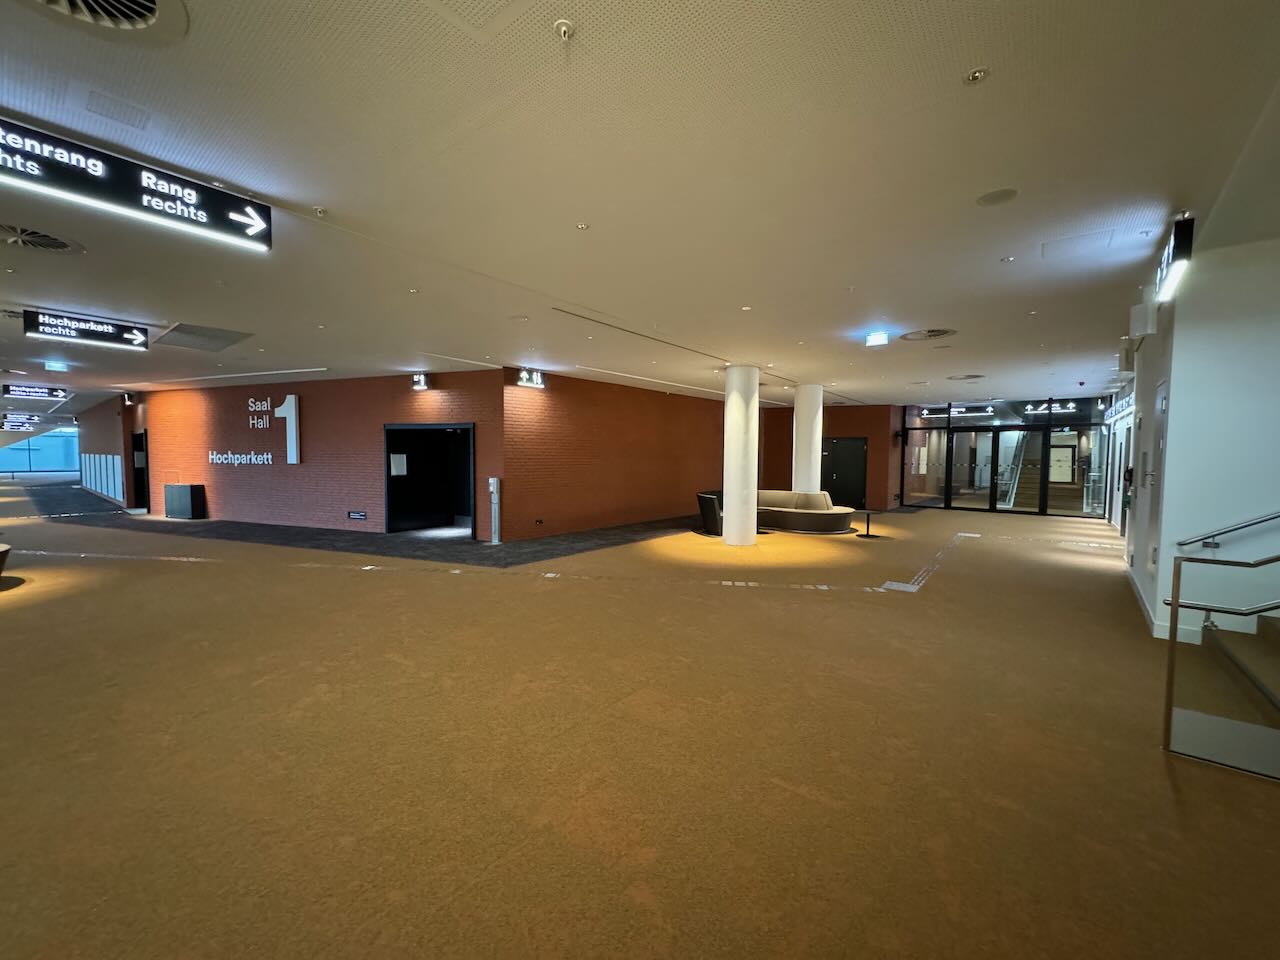  Hall 1 Foyer, right-hand side